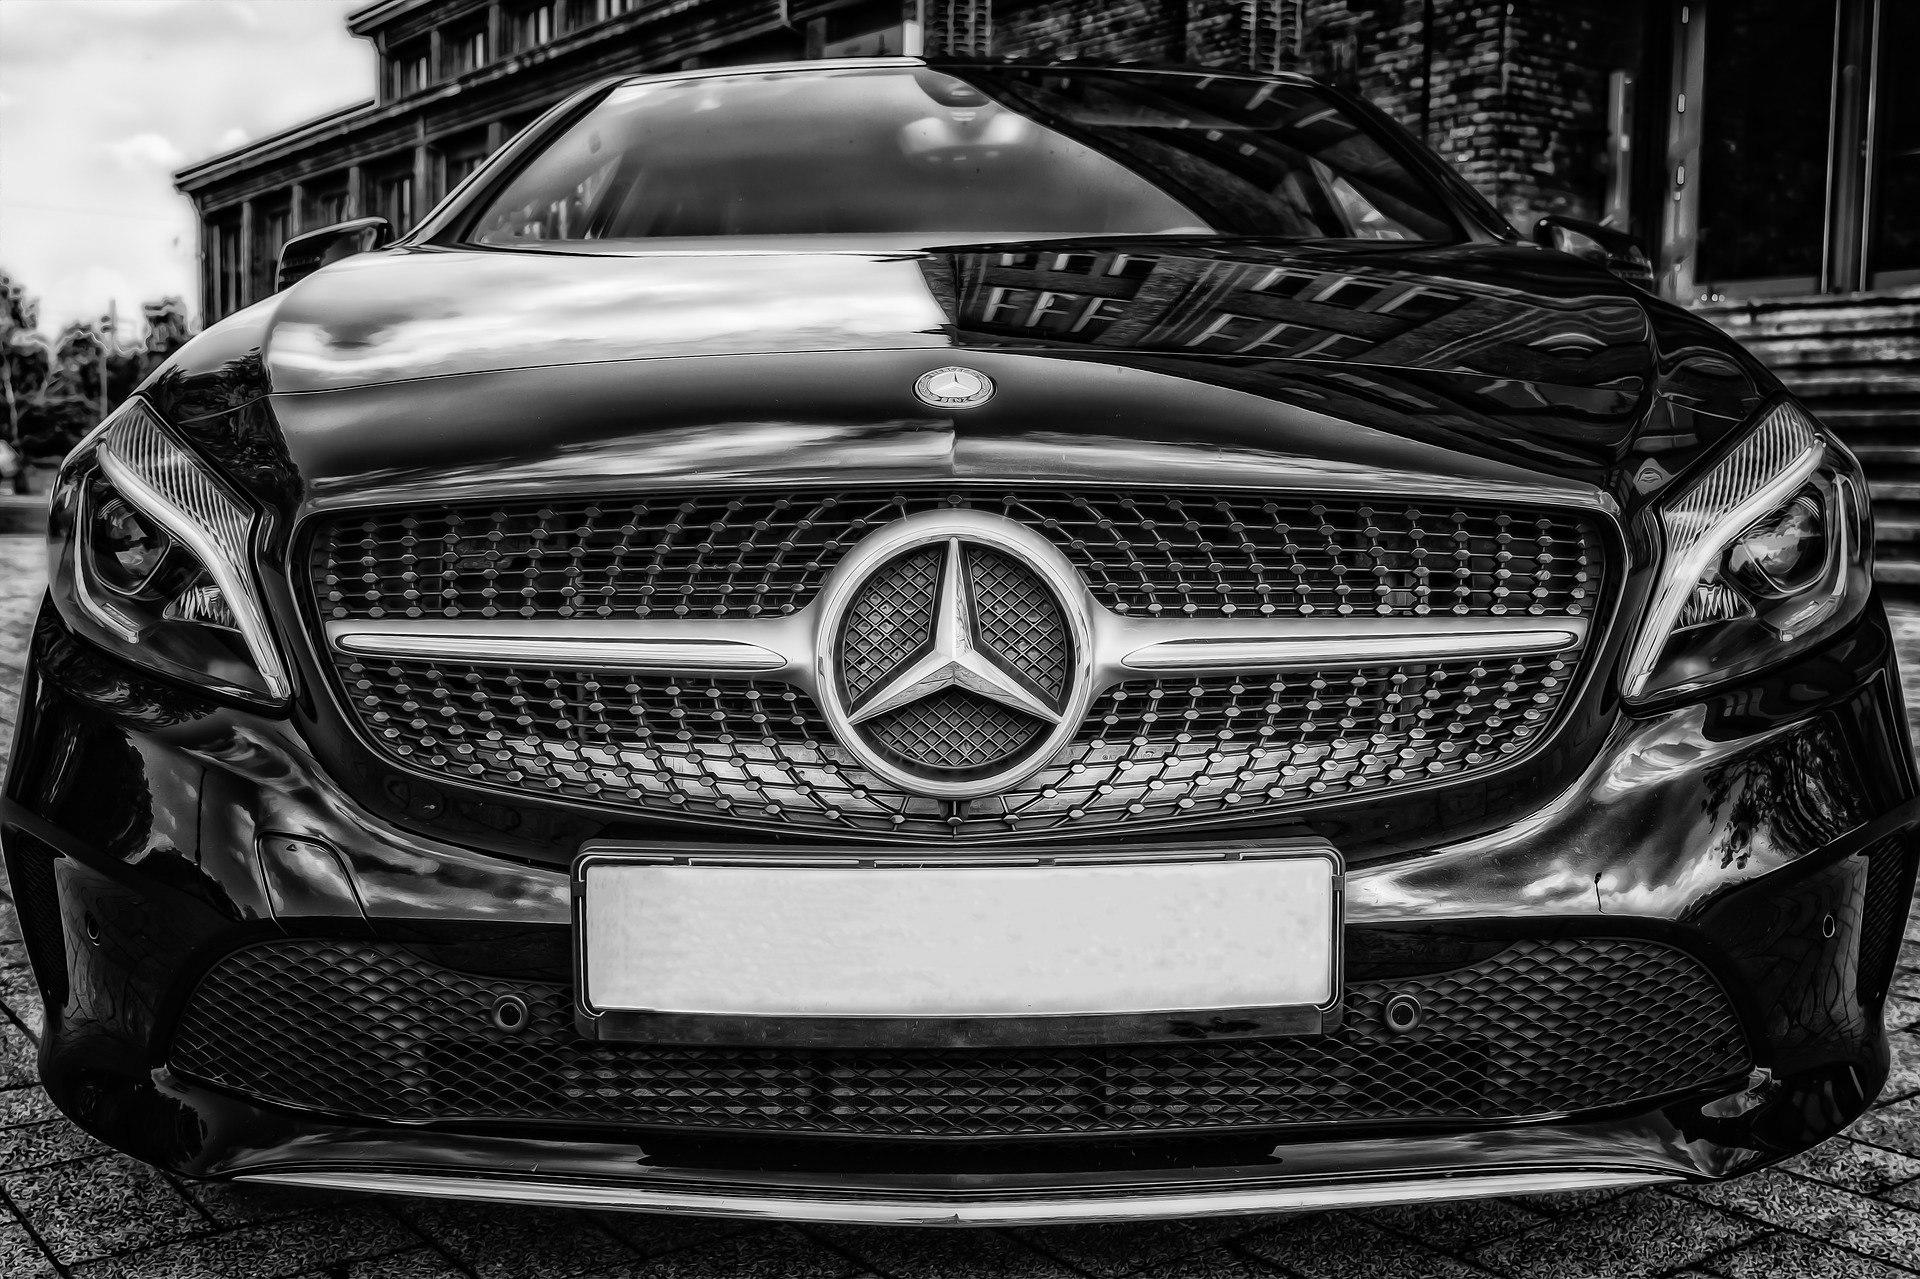 What Is The Average Life Of A Mercedes-Benz?